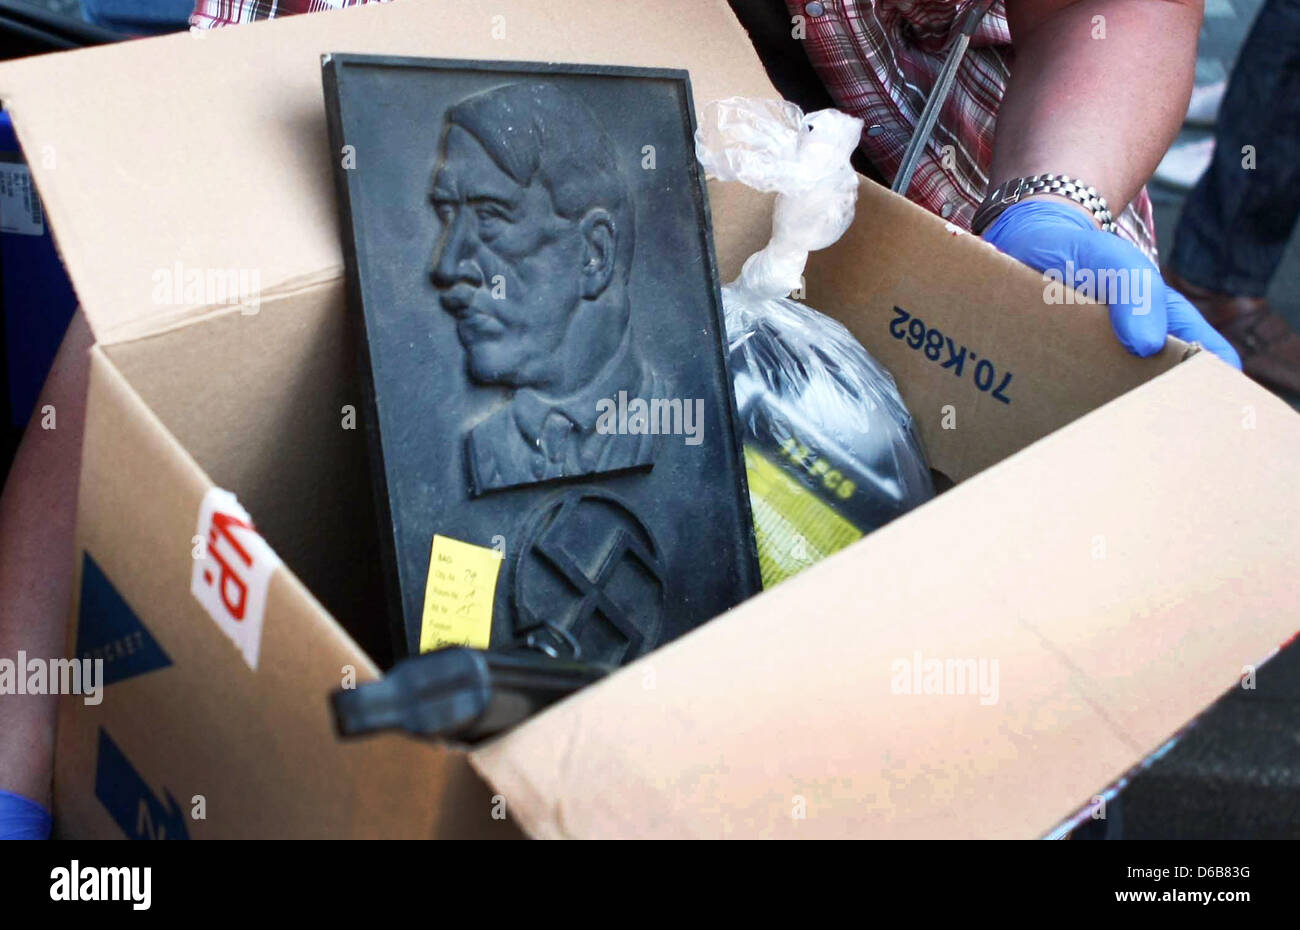 Policemen seize a Adolf Hitler relief during a house search of right-wing extremist organization 'Kameradschaft Aachener Land' in Juelich, Germany, 23 August 2012. Police were out in force after the North Rhine-Westphalian Interior Minister outlawed three right-wing extremist organizations, the 'Kameradschaft Aachener Land', the 'Nationaler Widerstand Dortmund' and the 'Kameradscha Stock Photo